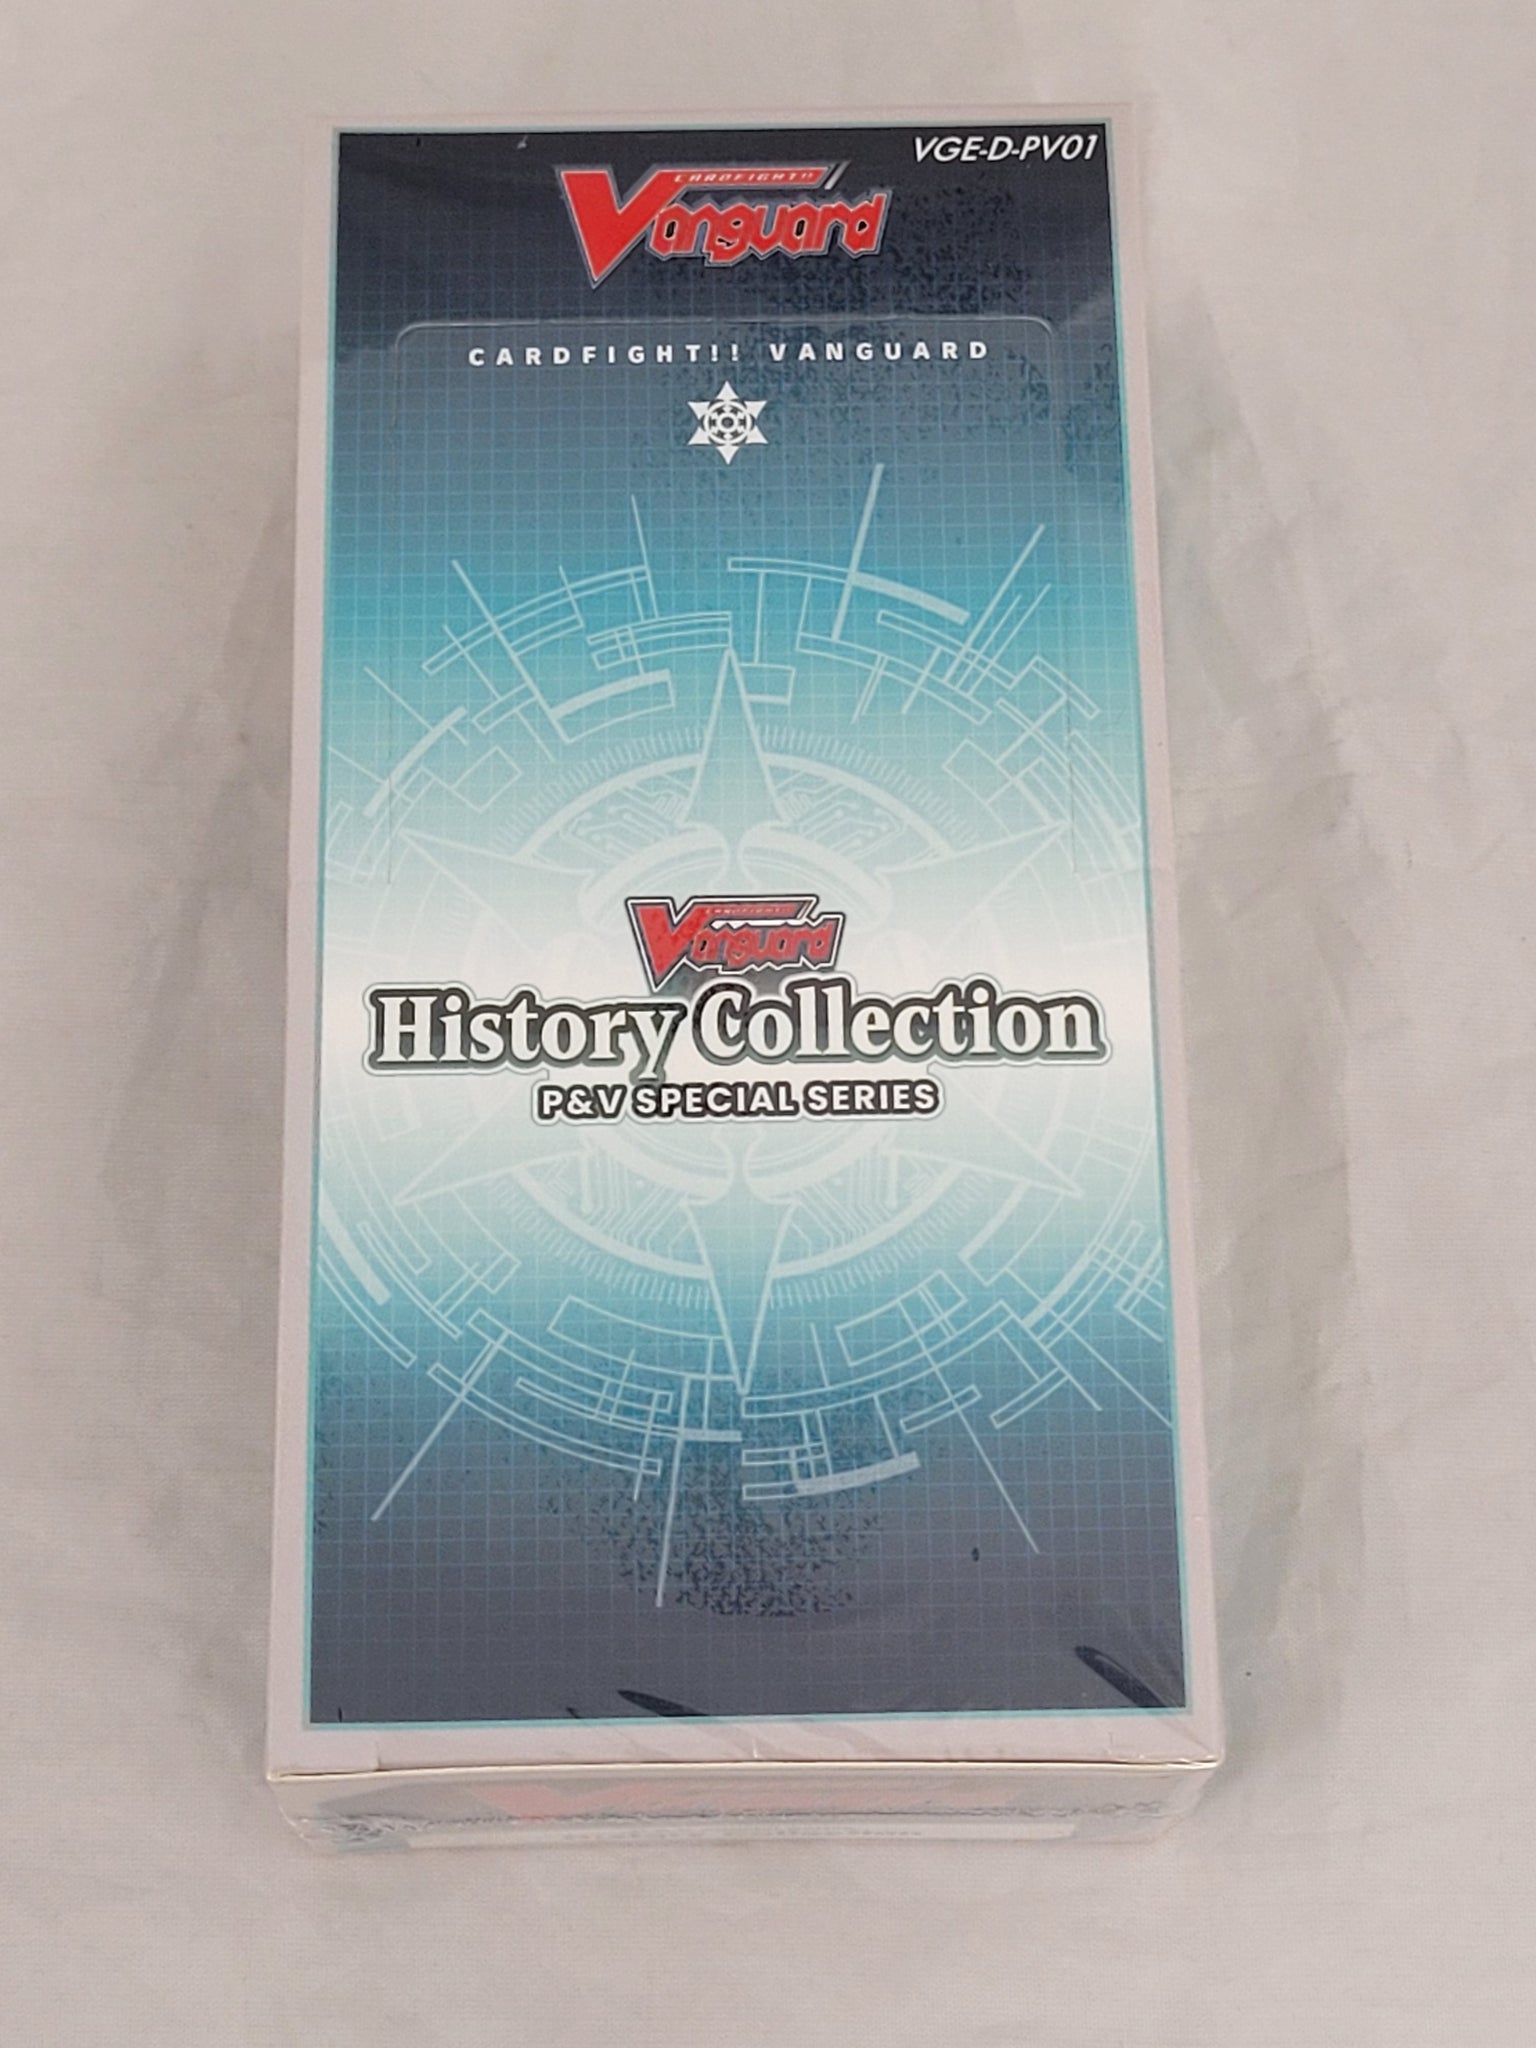 Cardfight!! Vanguard - VGE-D-PV01 -  P & V Special Series - History Collection